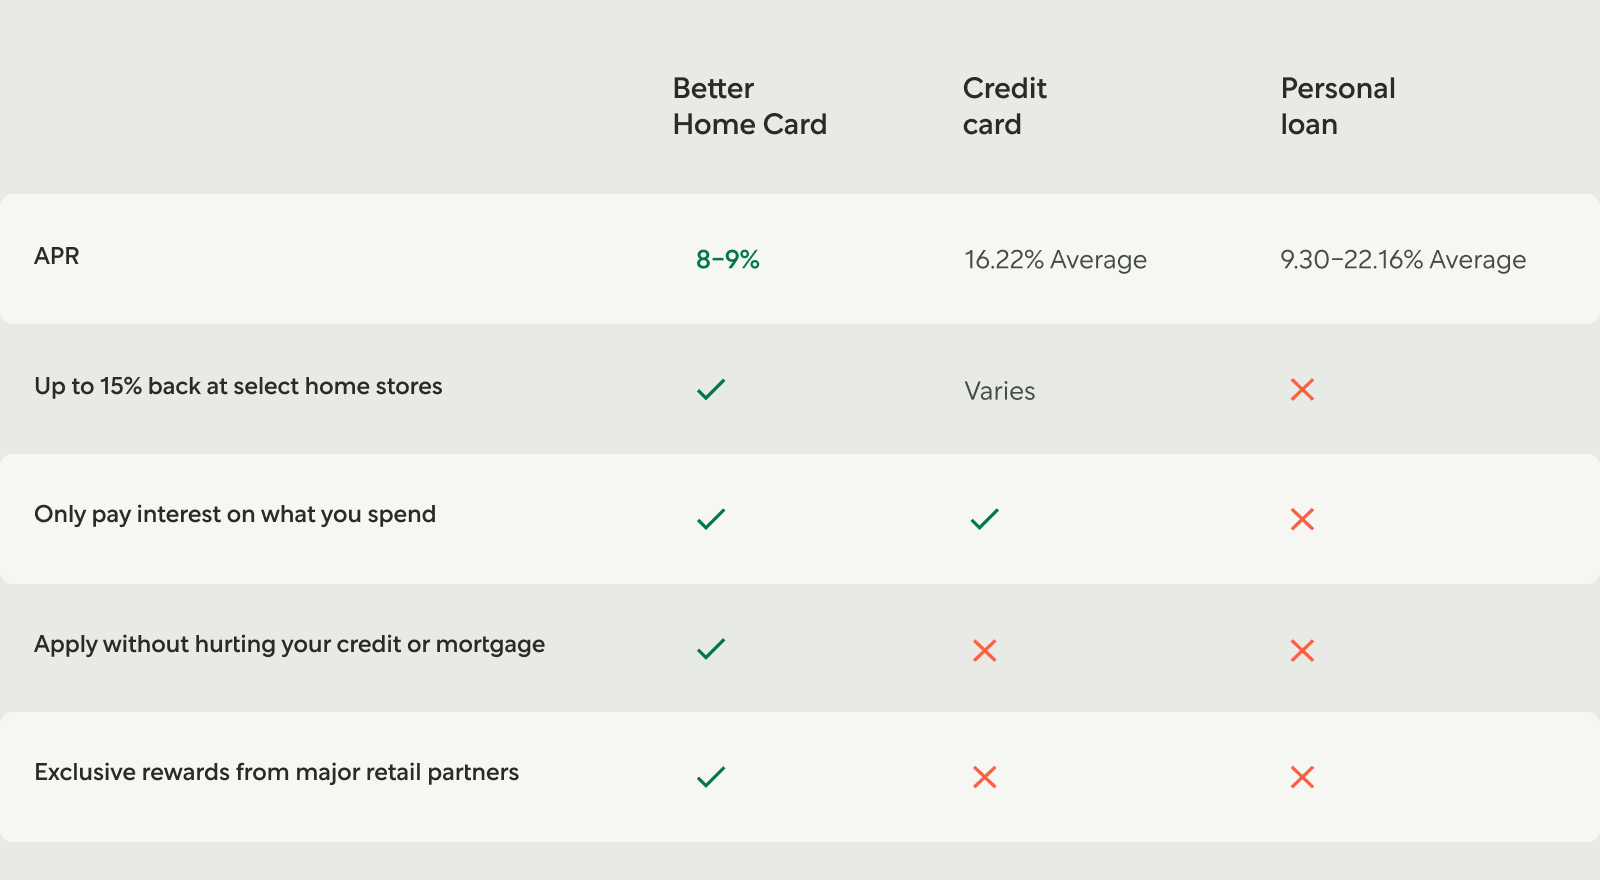 Chart Showing Difference Between Better Home Card, Credit Card, And Personal Loan